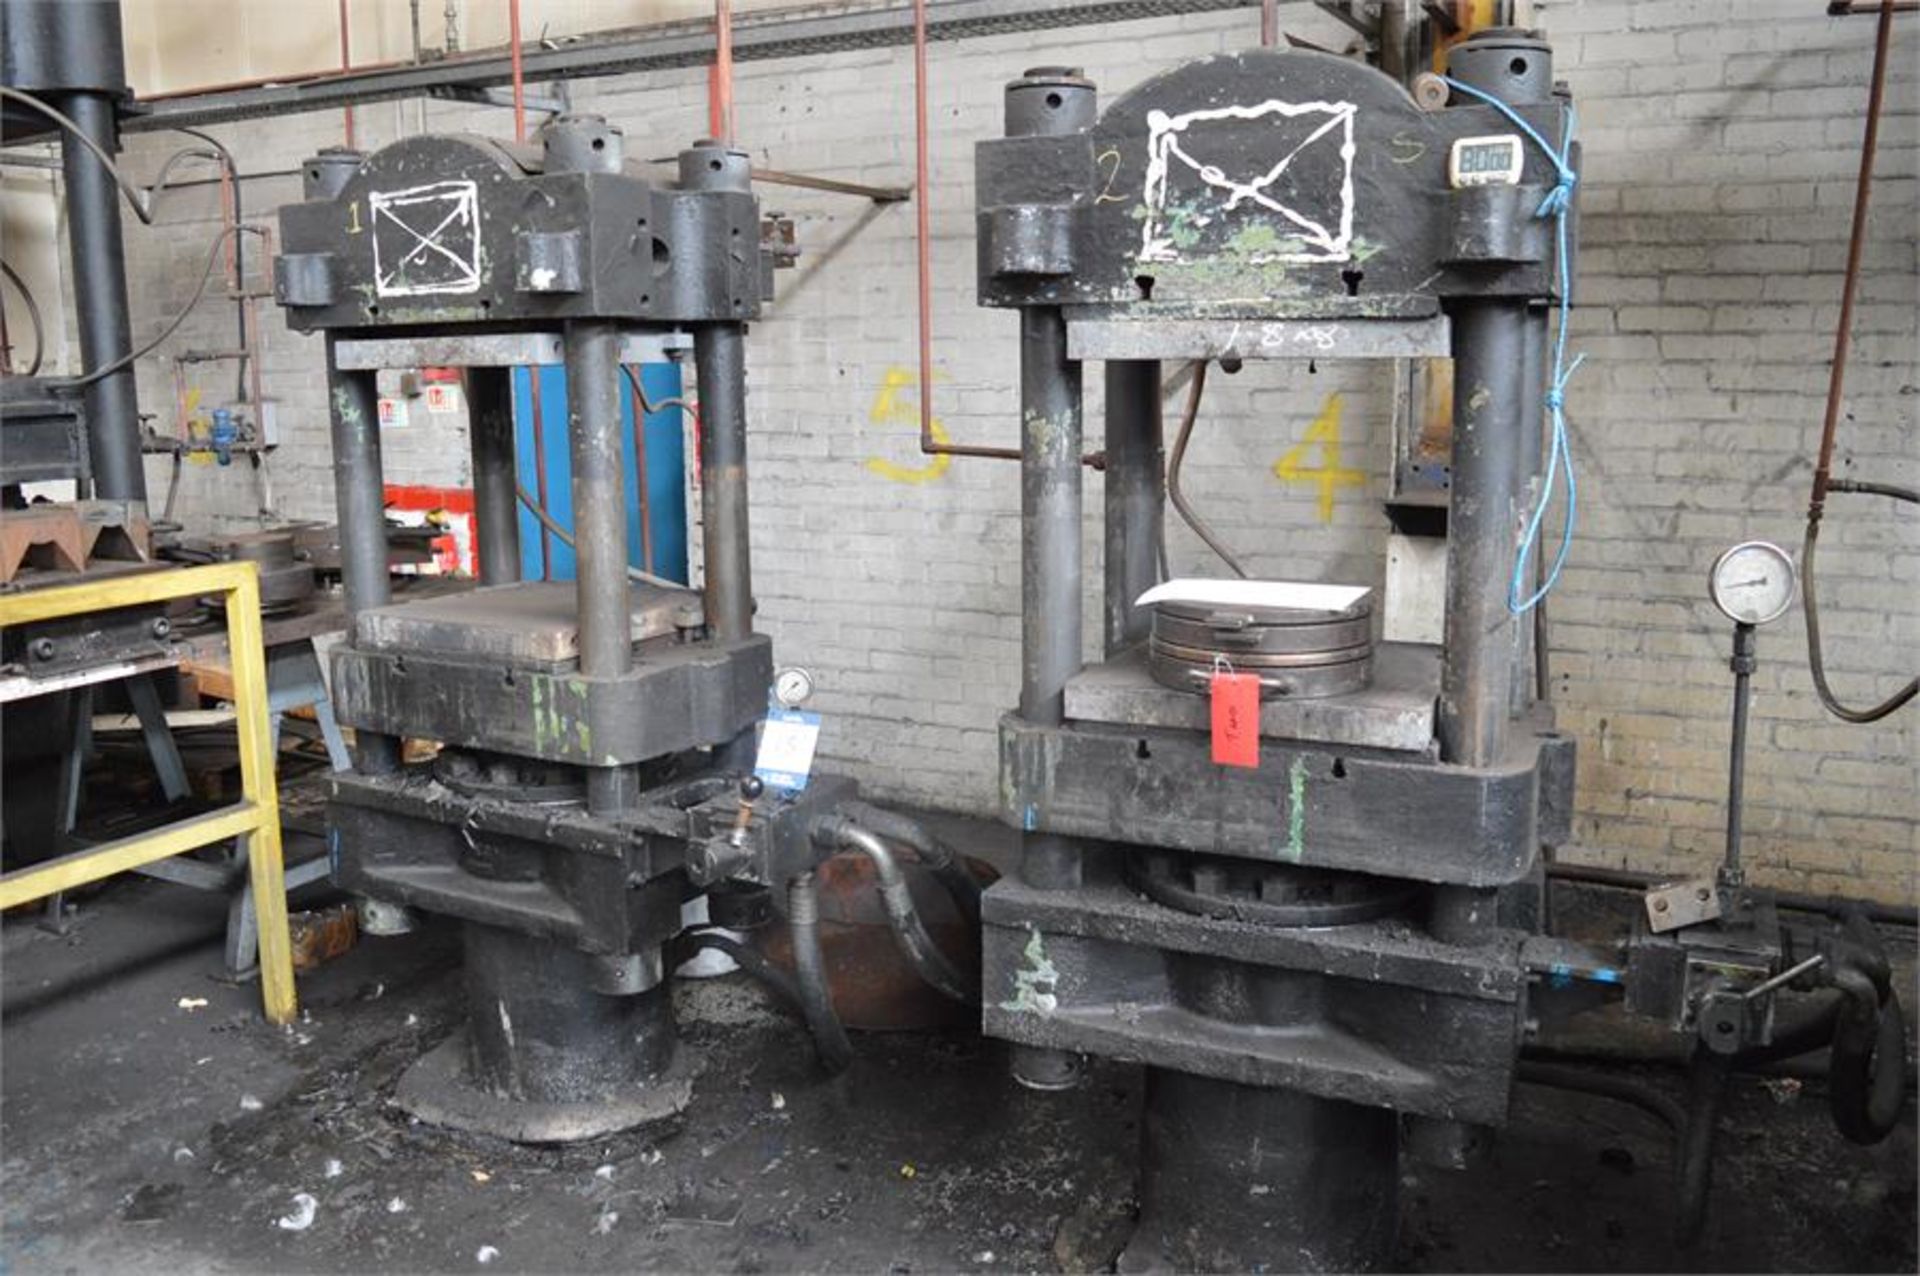 2 x Unbadged hydraulic upstroke platen presses, 20" x 20" steam heated platens with hydraulic - Image 2 of 2